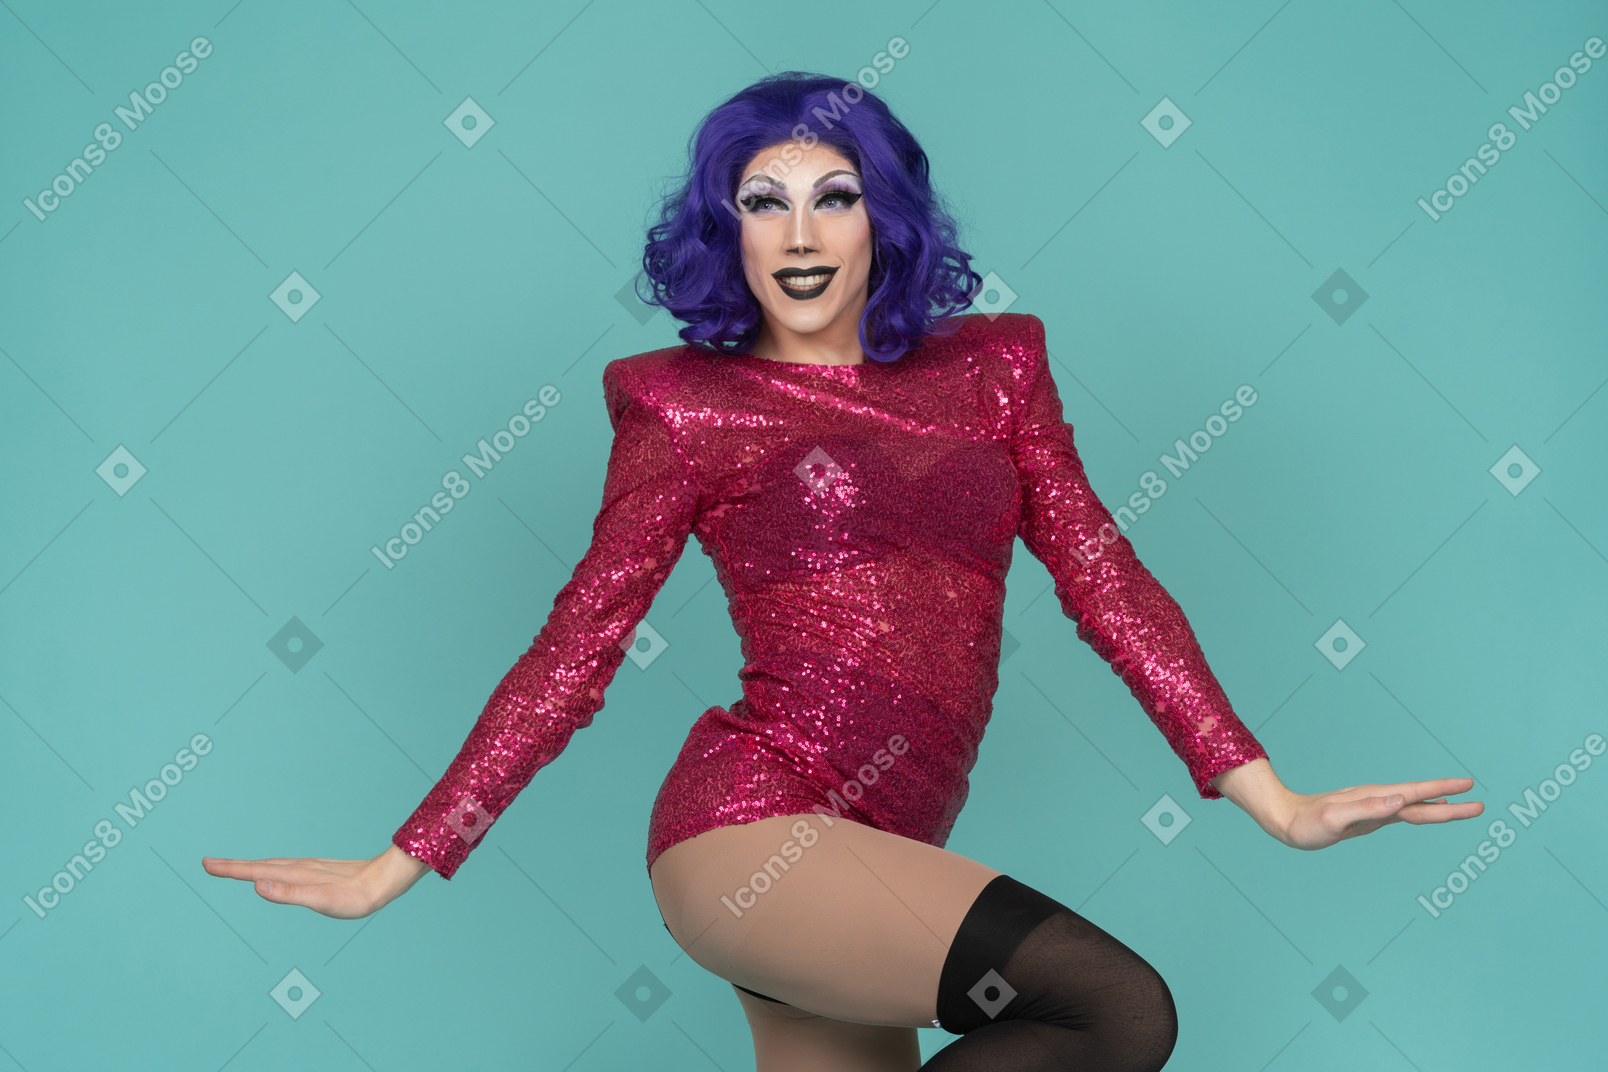 Portrait of a drag queen raising hip while twirling around